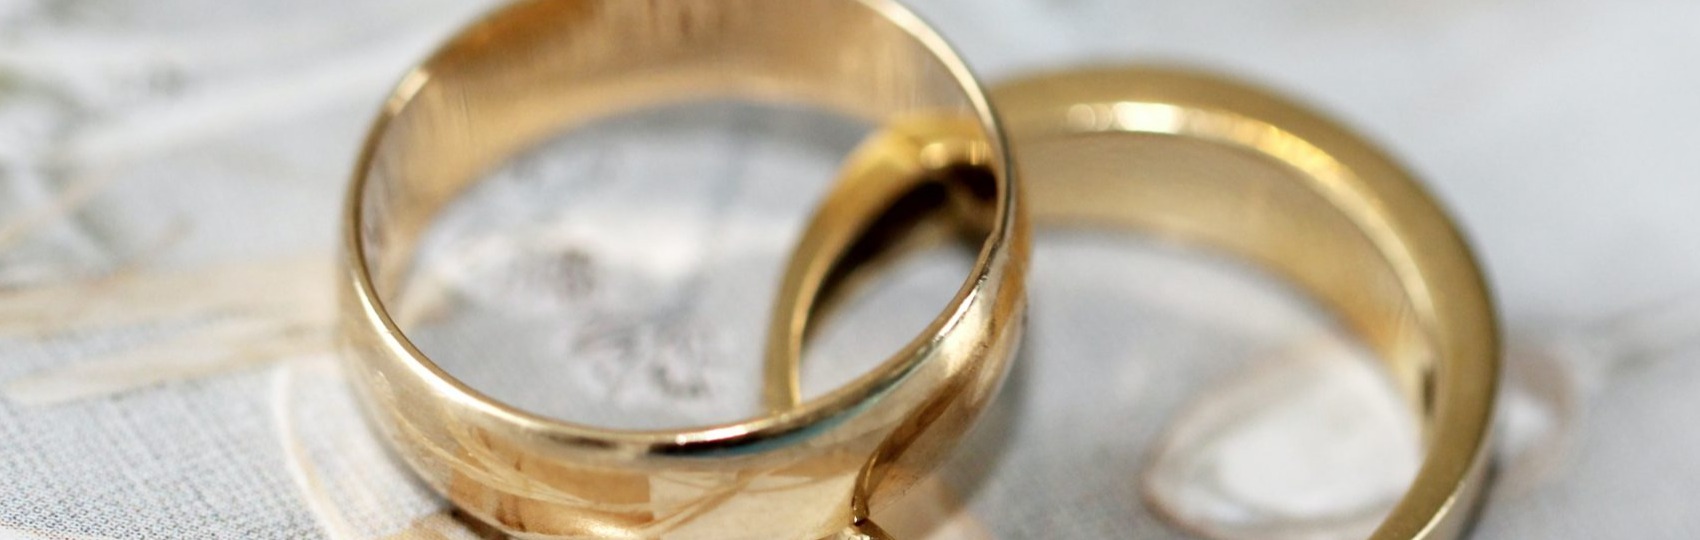 Photo of two gold rings